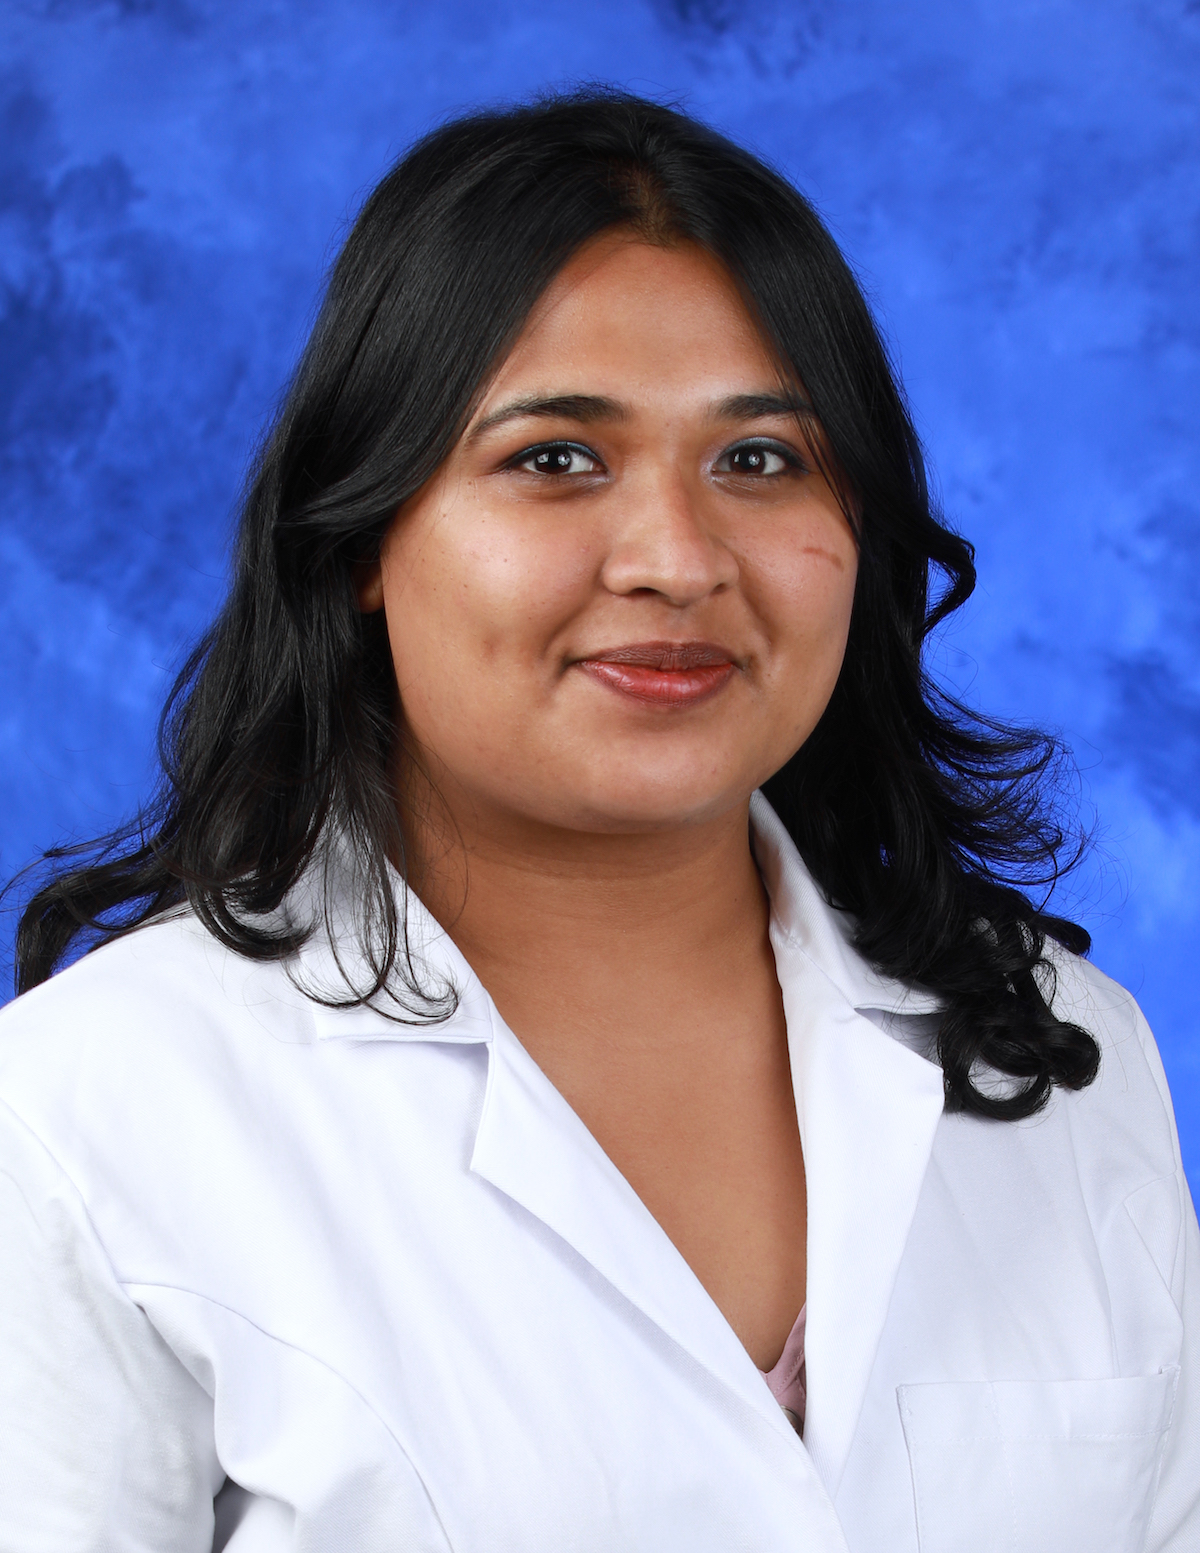 Dr. Priyanka Lakshmanan is pictured in a professional head-and-shoulders photo